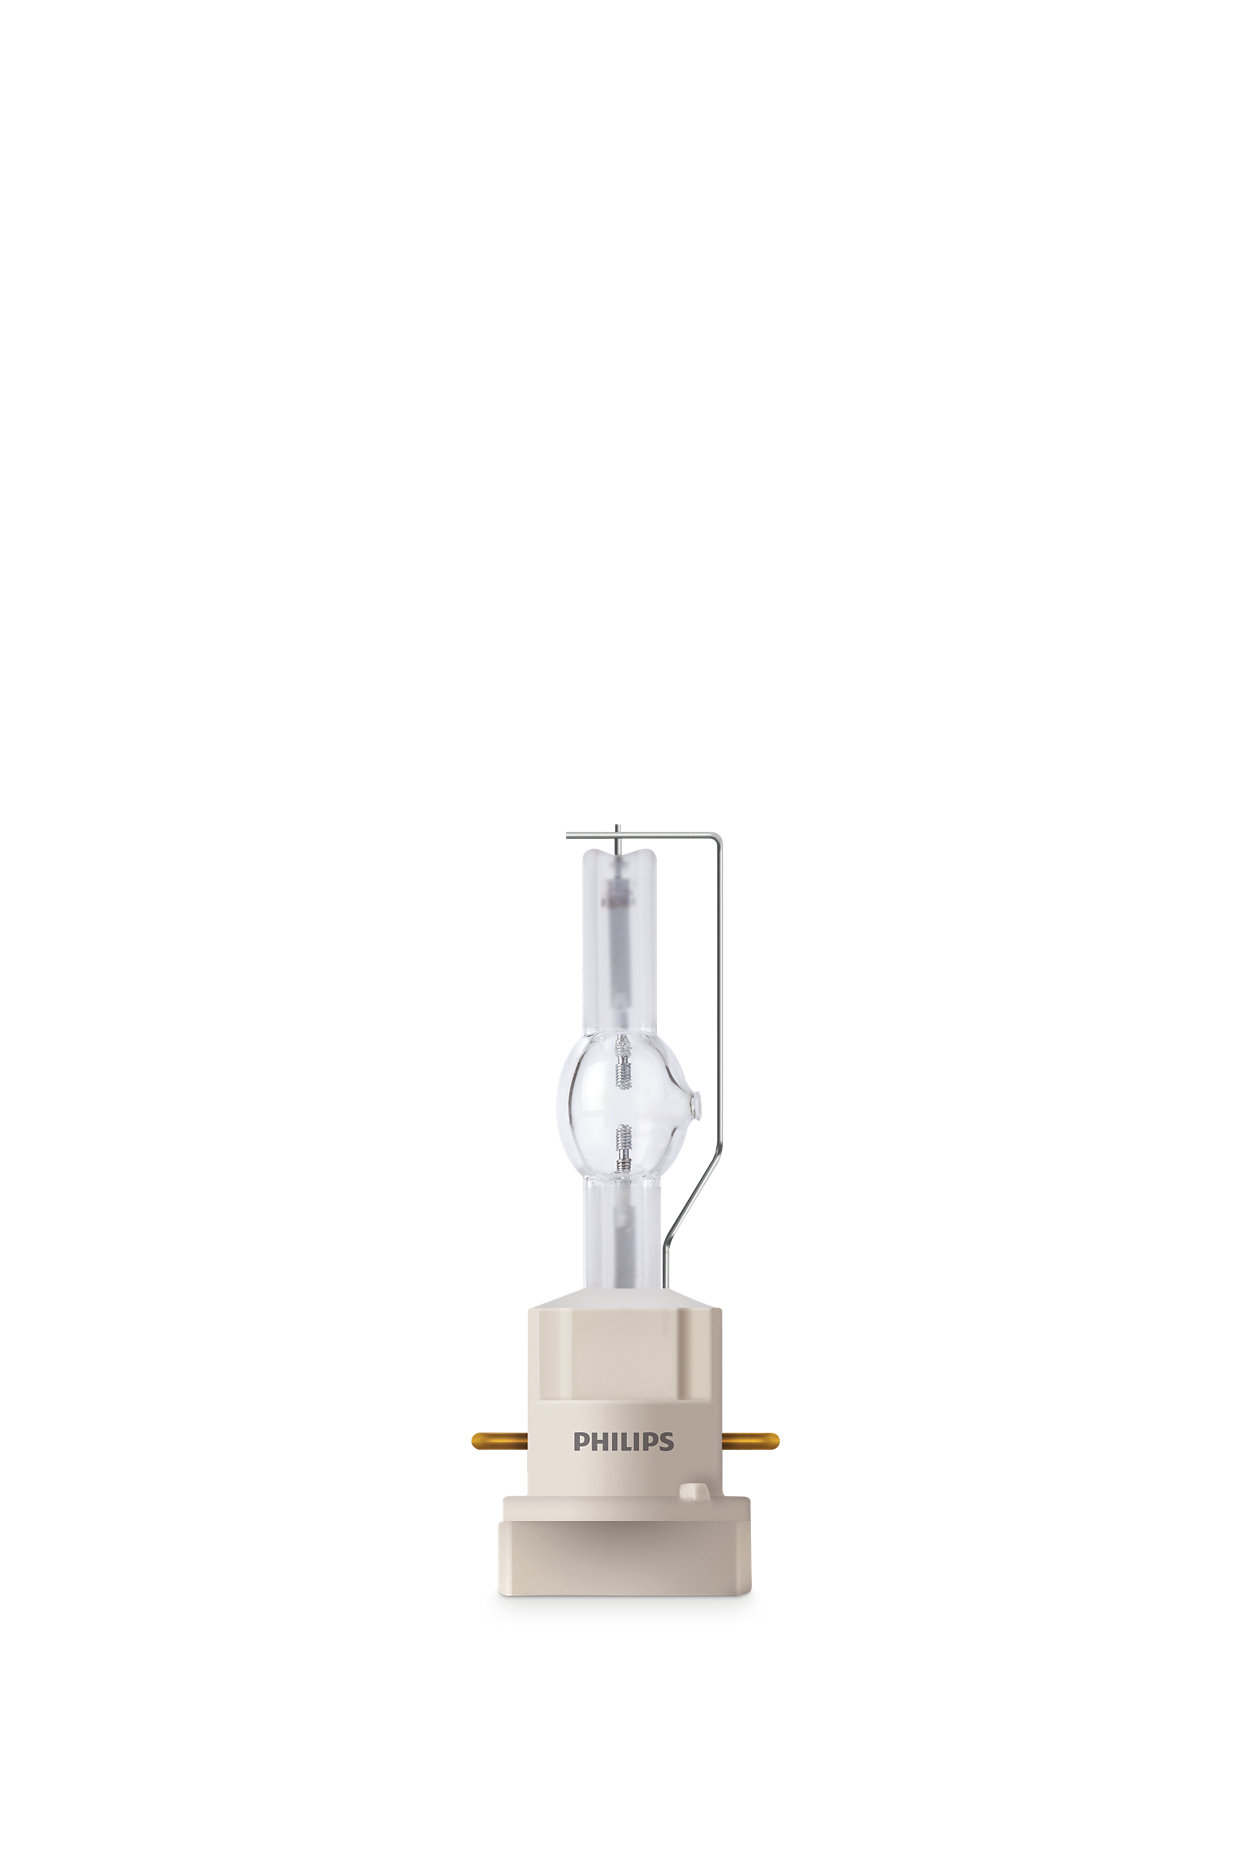 MSR Gold™ MiniFastFit – lamp replacement in seconds